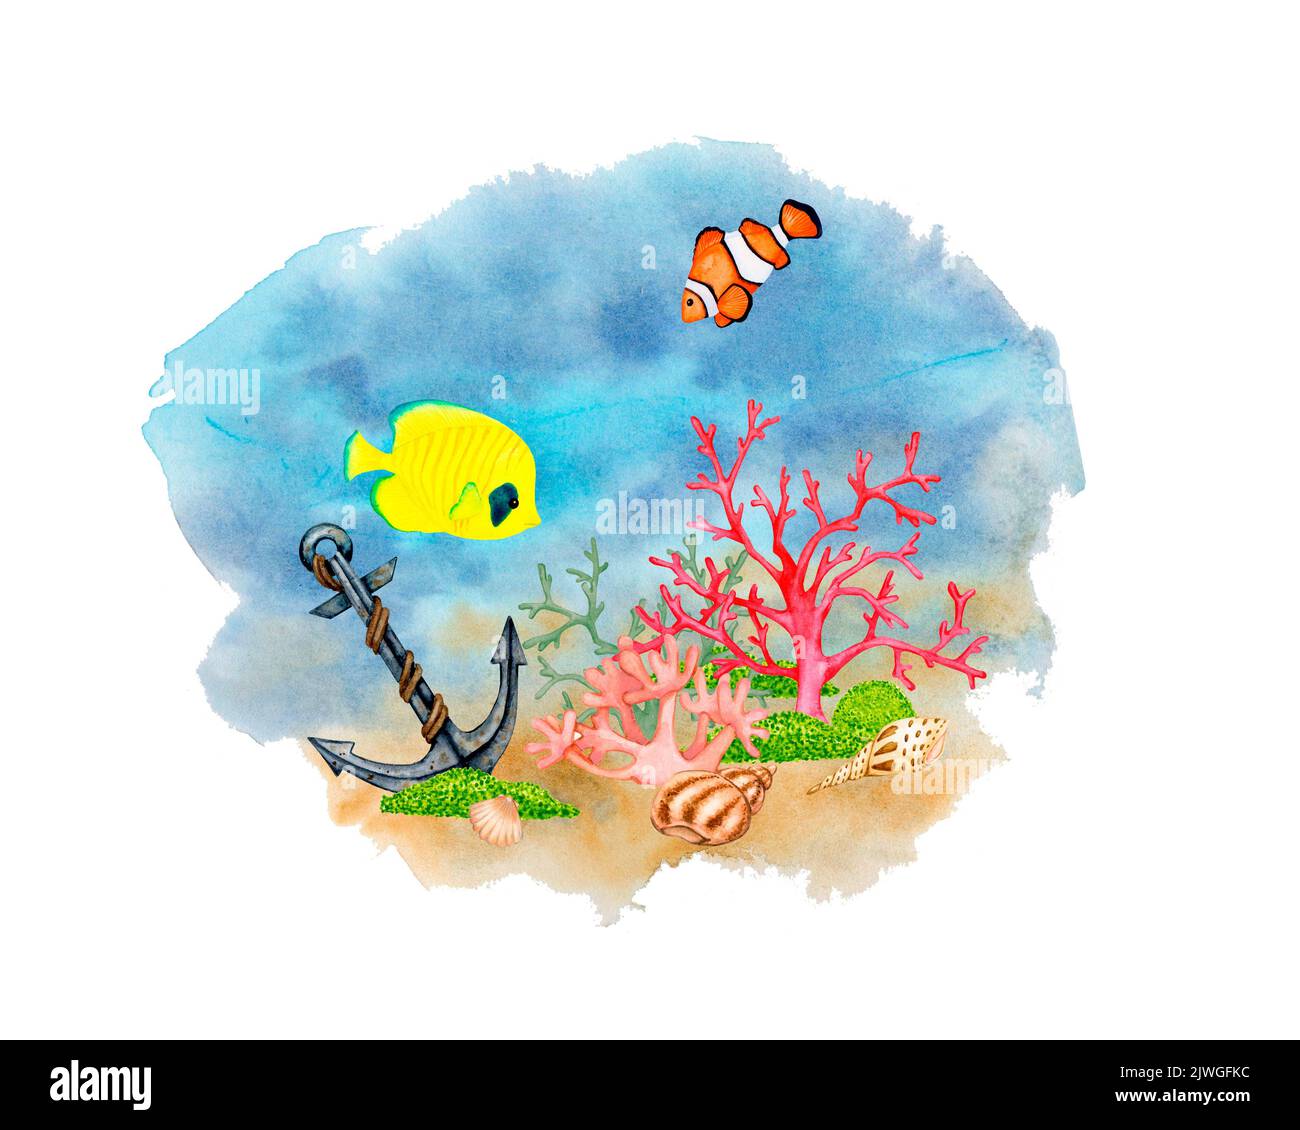 Sea bottom. Watercolor composition. Coral reef, shells, sunken anchor and exotic fish. Stock Photo